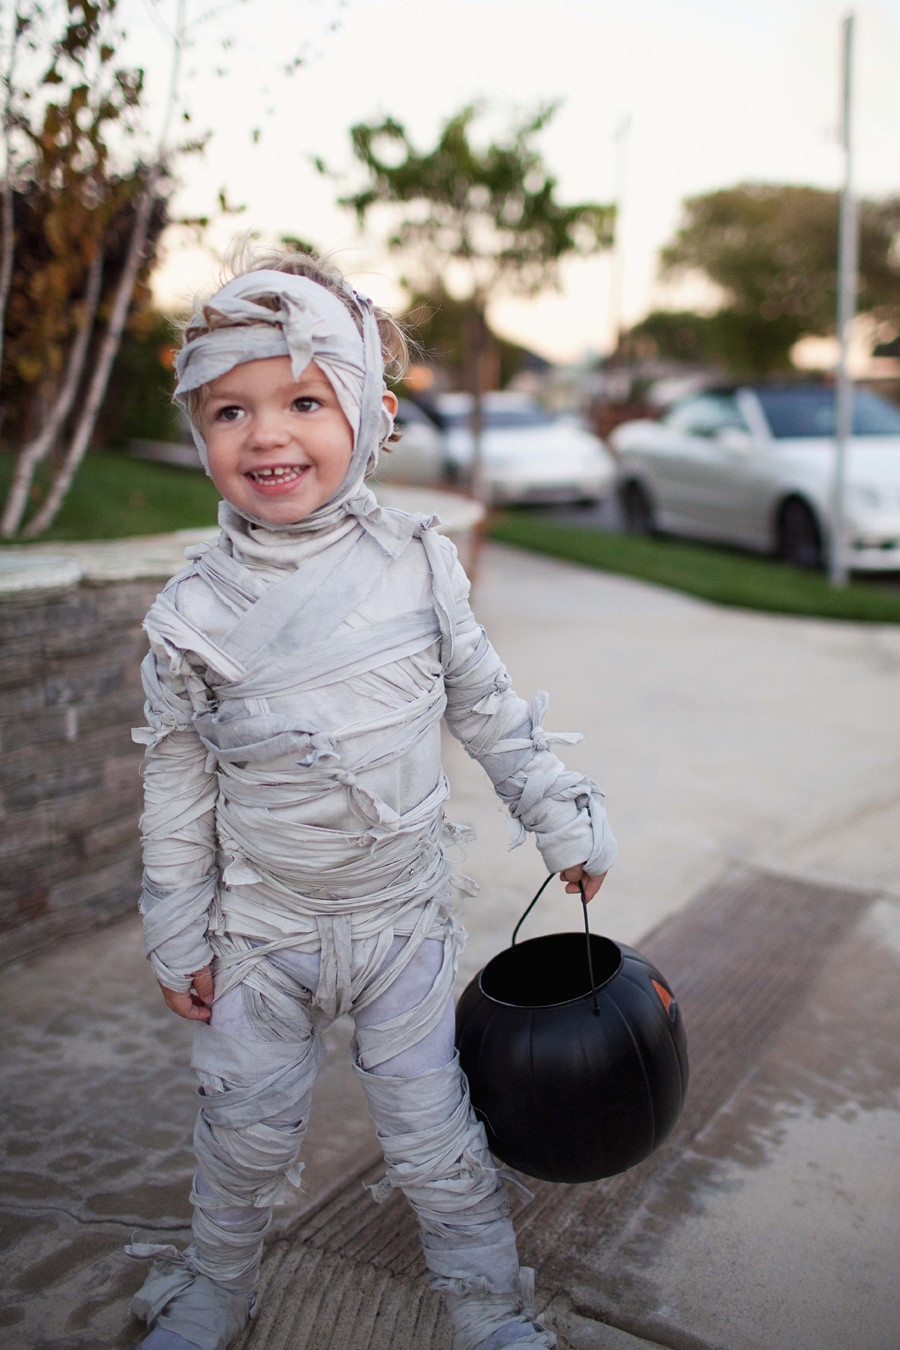 DIY Mummy Costume
 TELL MONSTER FAMILY COSTUME DIY Tell Love and PartyTell